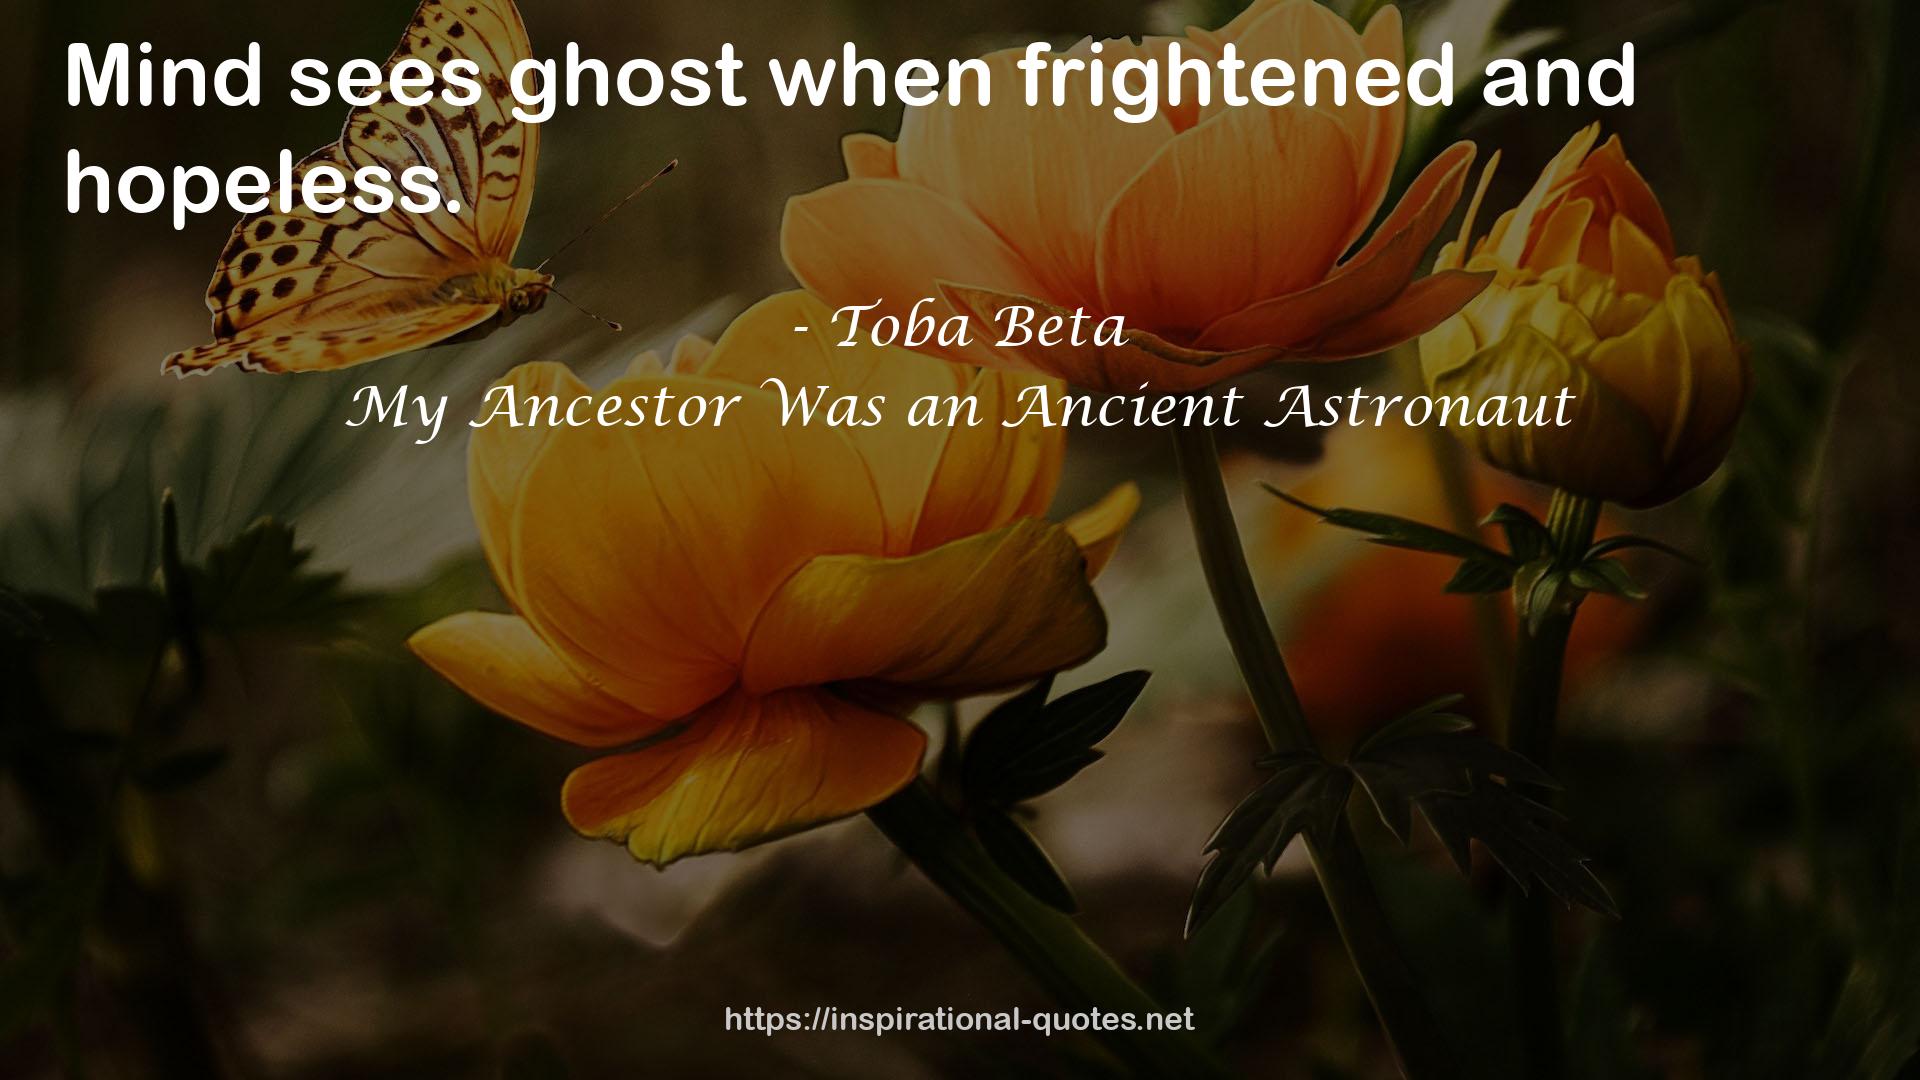 My Ancestor Was an Ancient Astronaut QUOTES